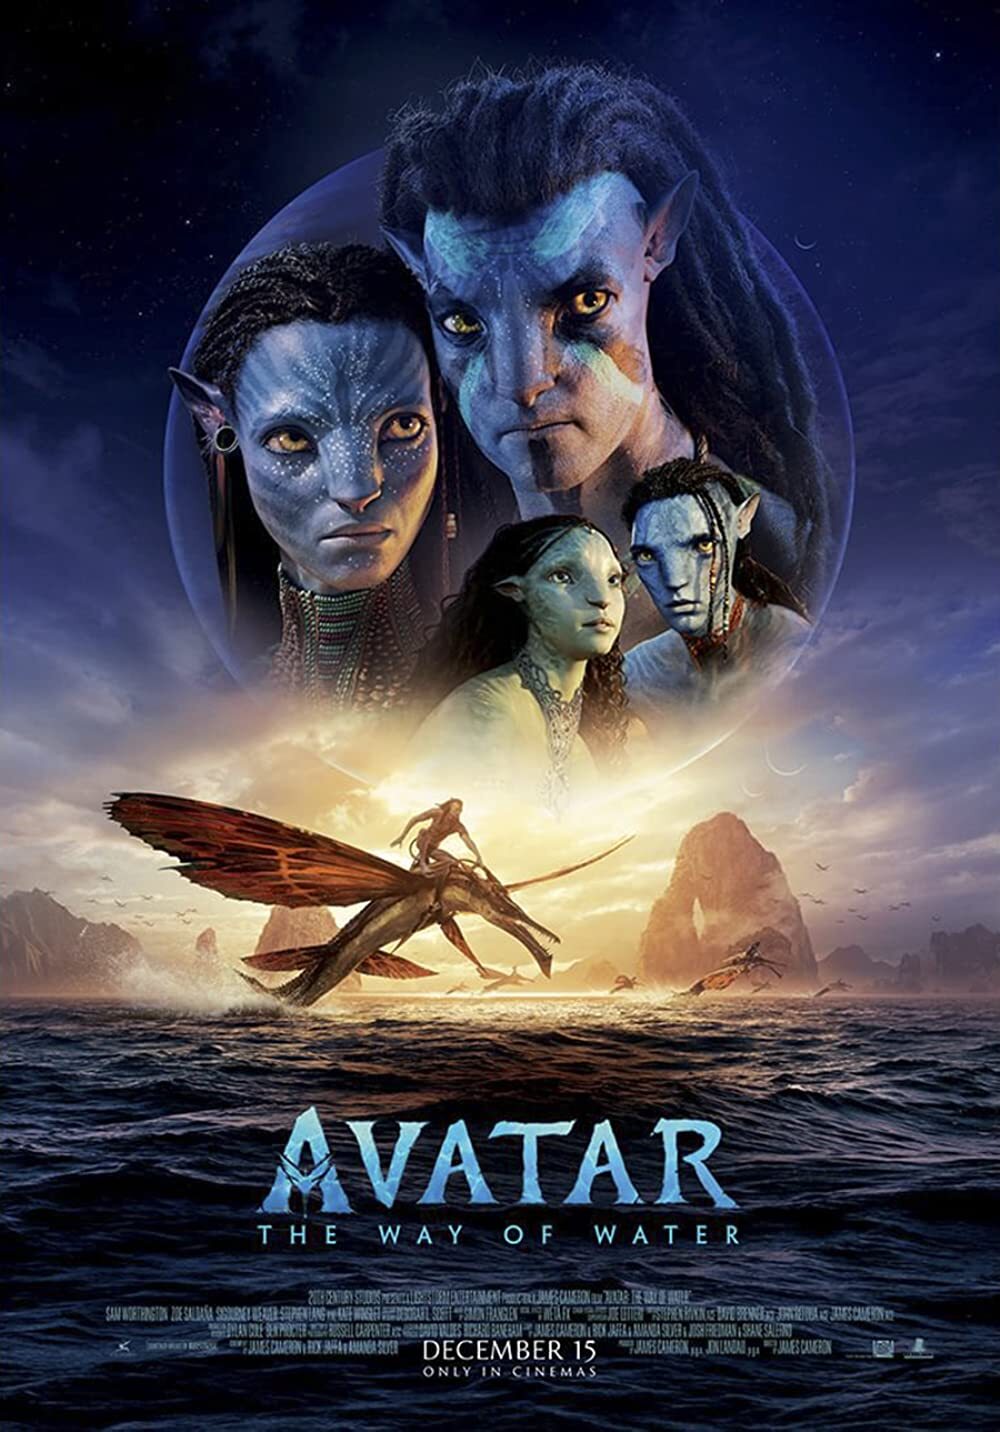 Avatar: The Way of Water Suite